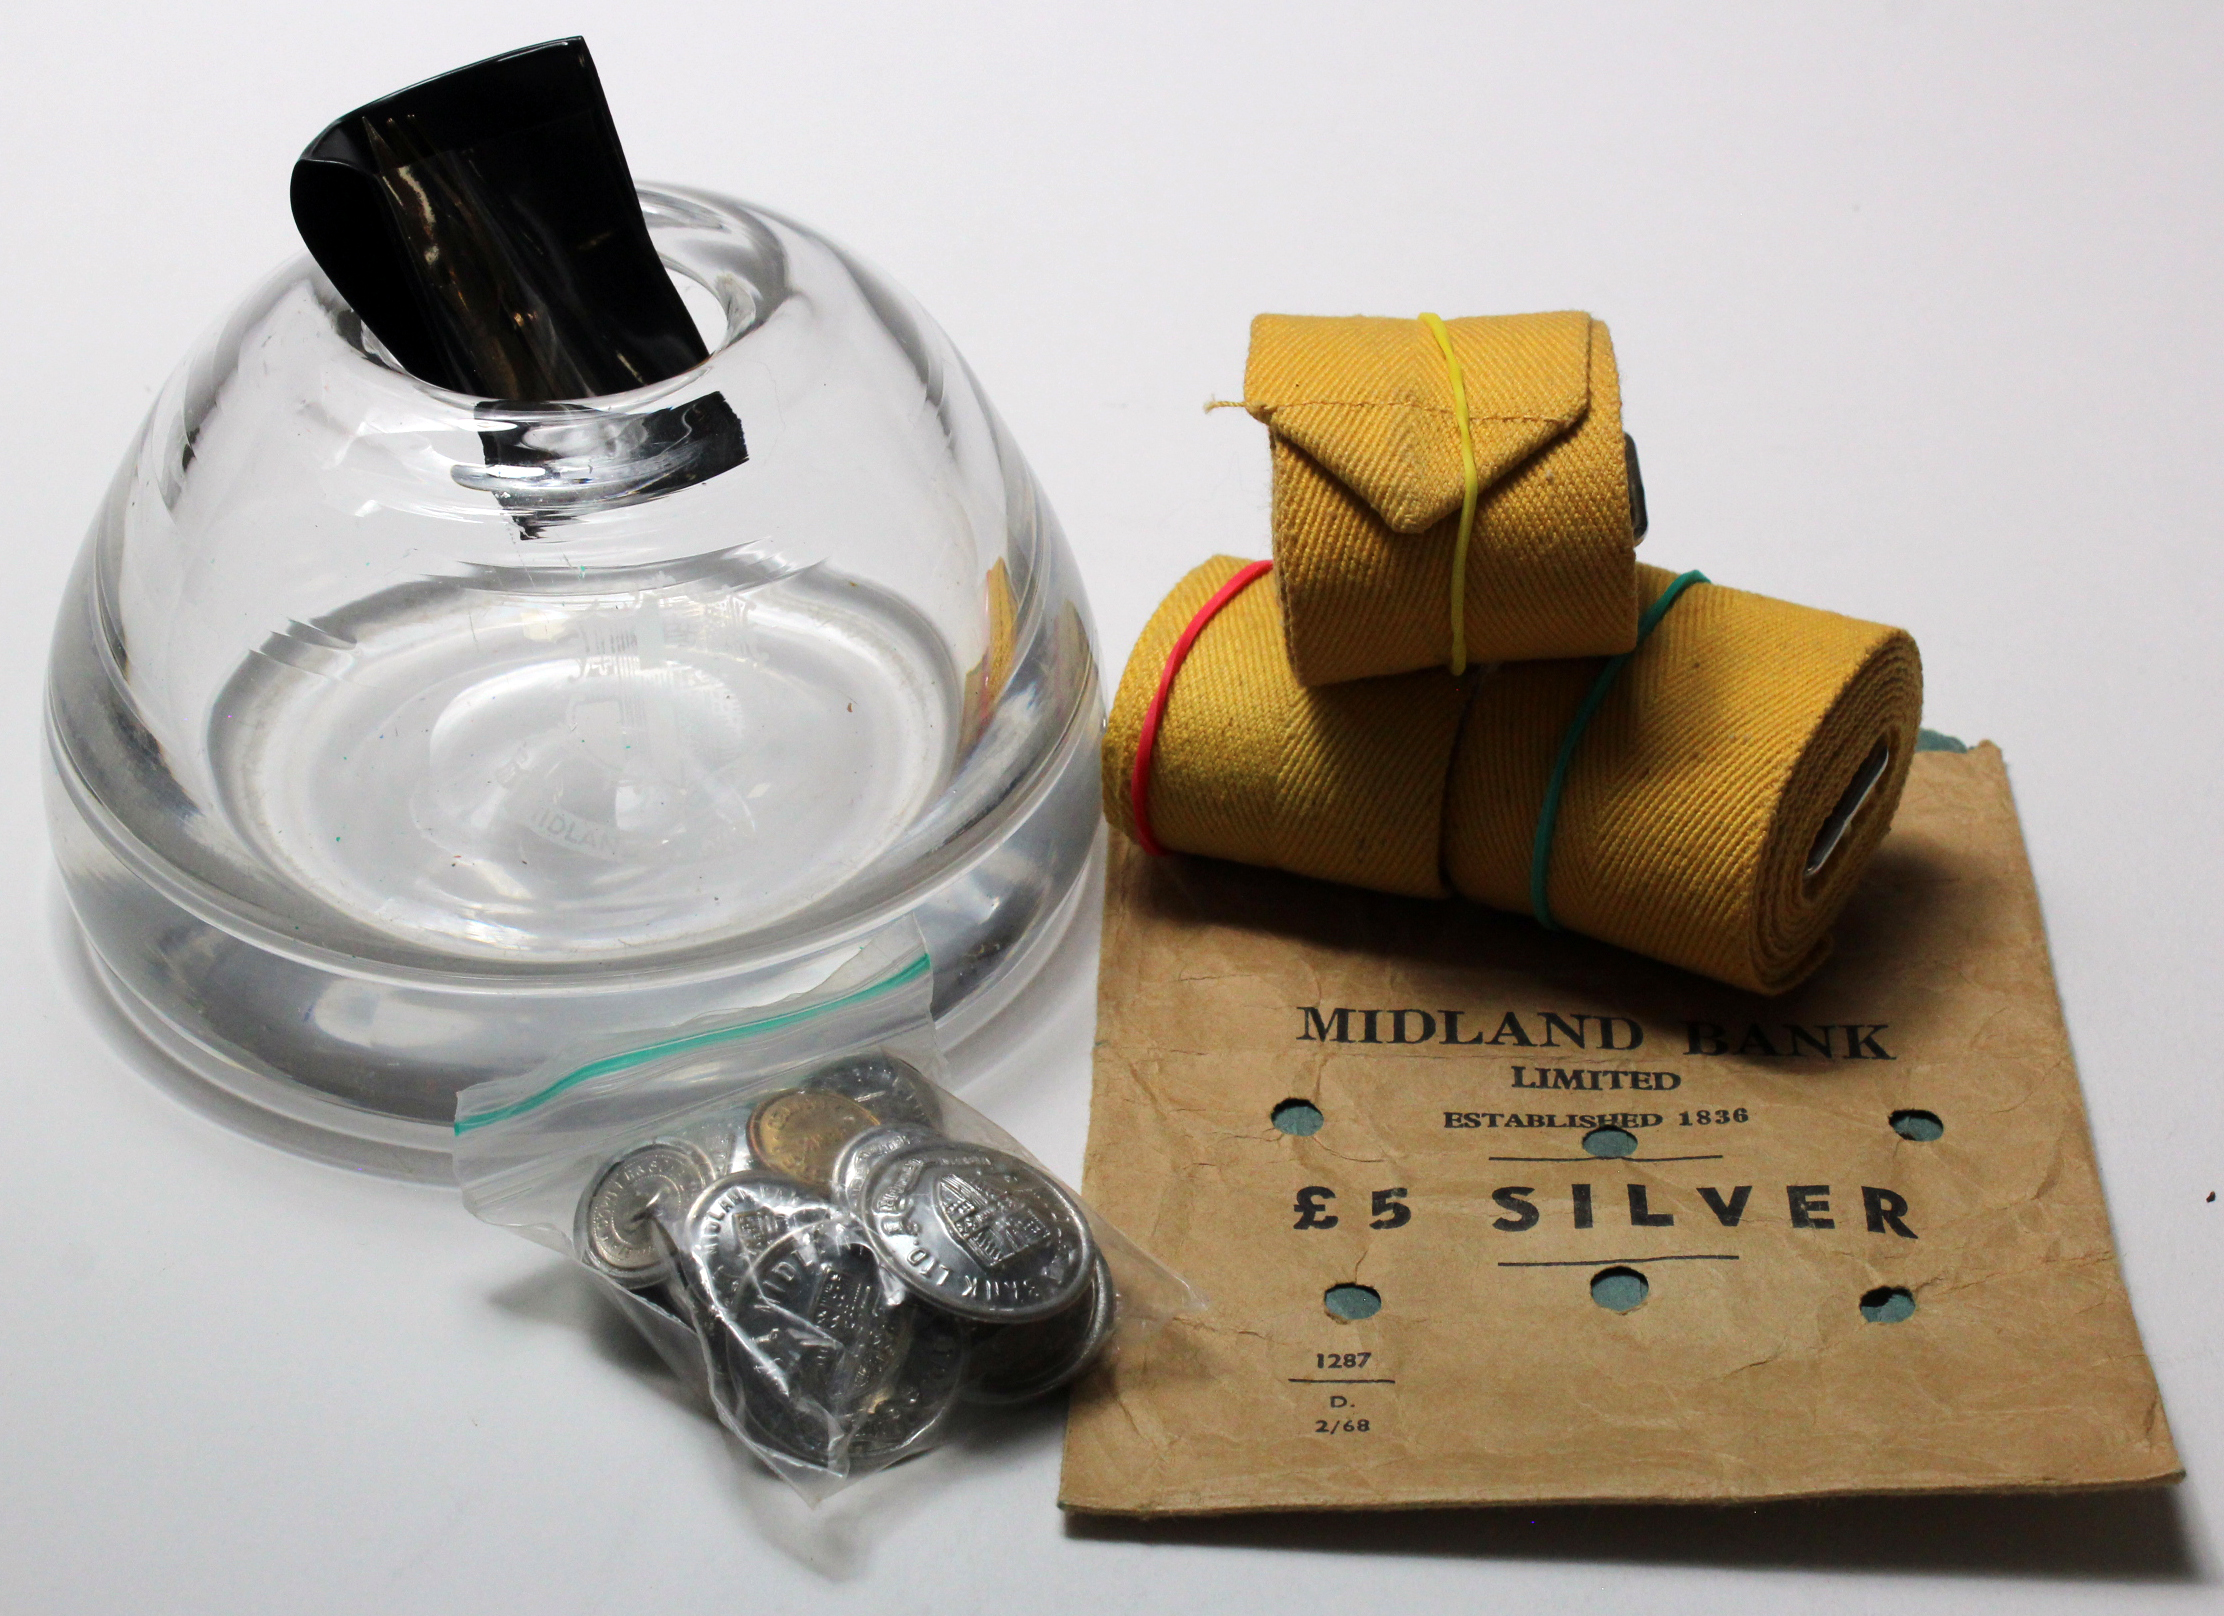 Midland Bank Ltd ephemera, large heavy glass ink well, ink pen nibs (12), Buttons (3 large, 13